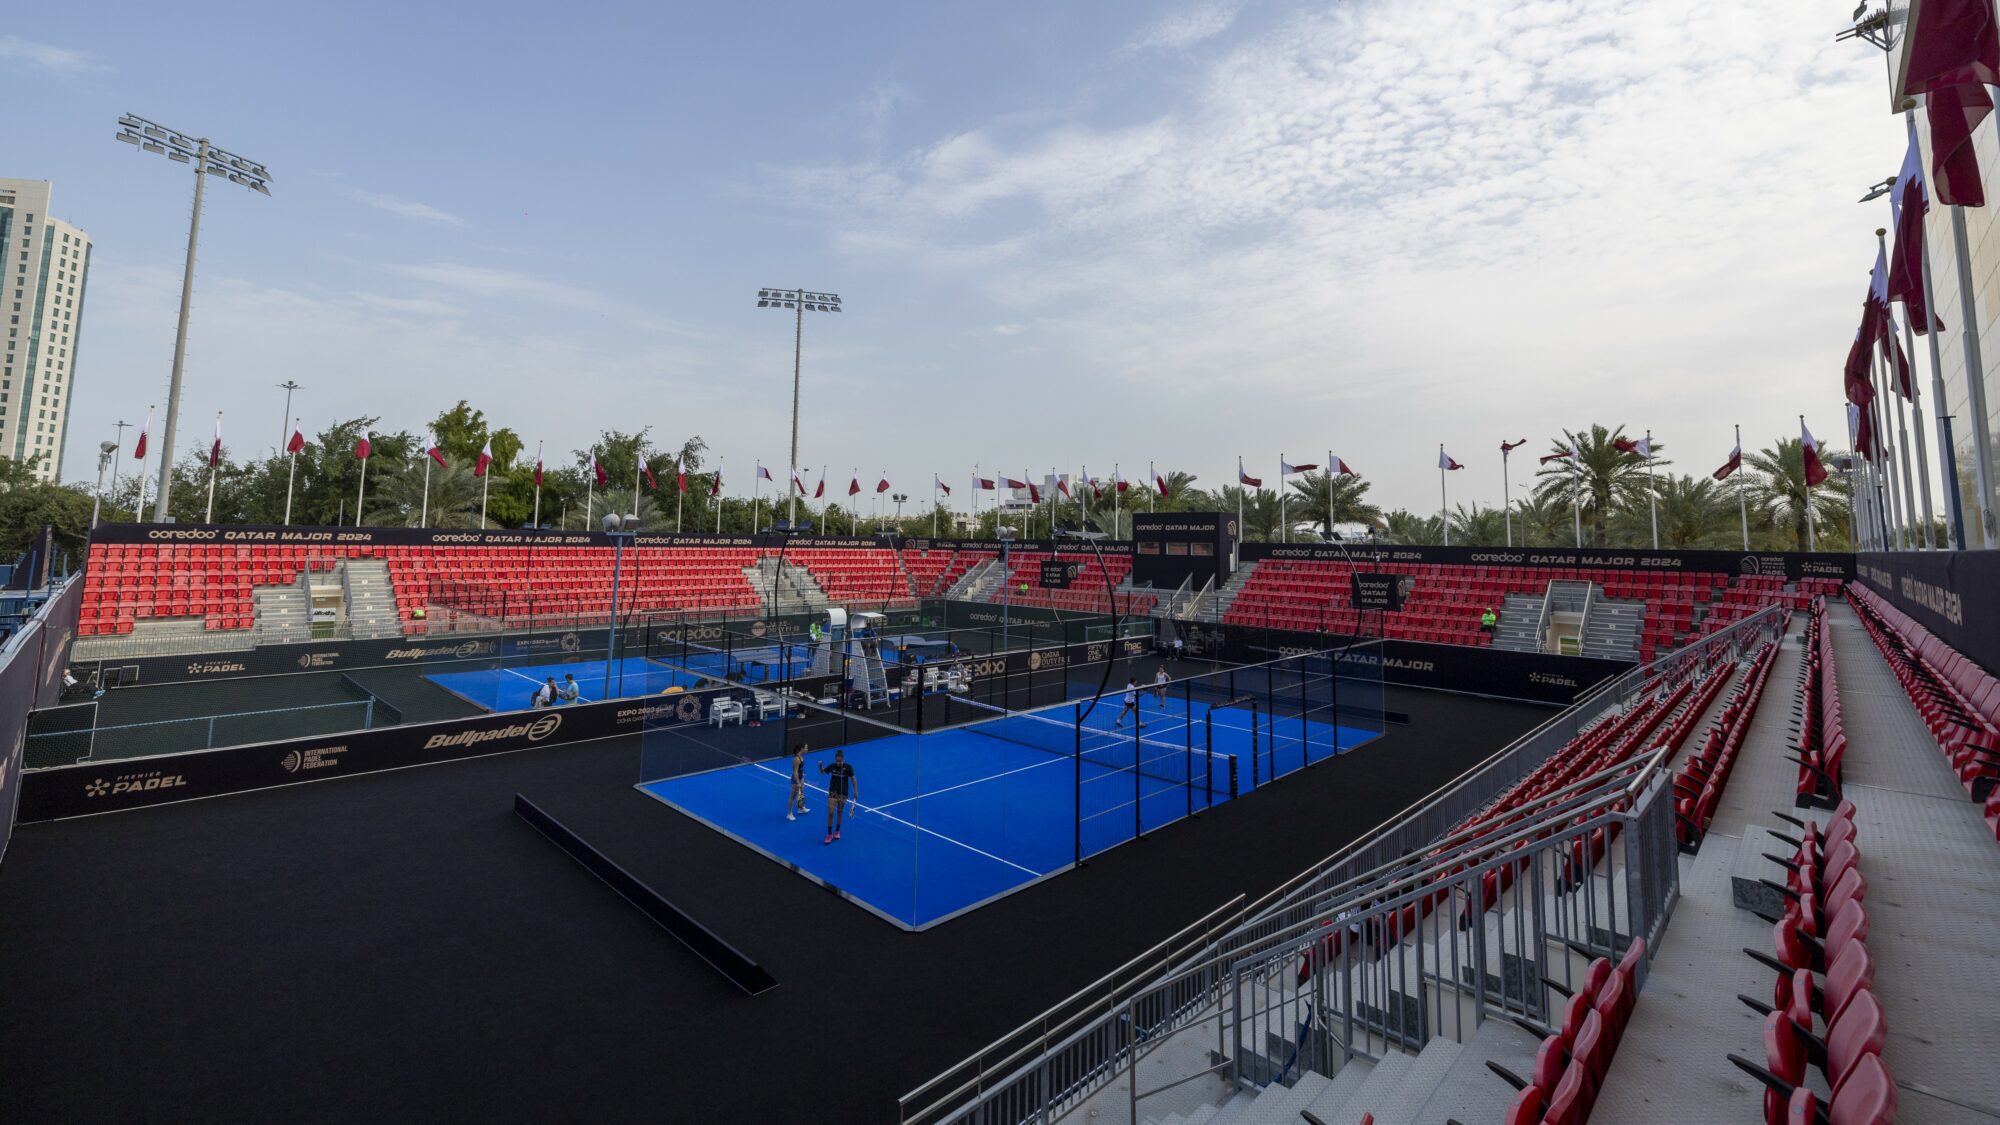 Padel outdoor: what are the differences with indoor?